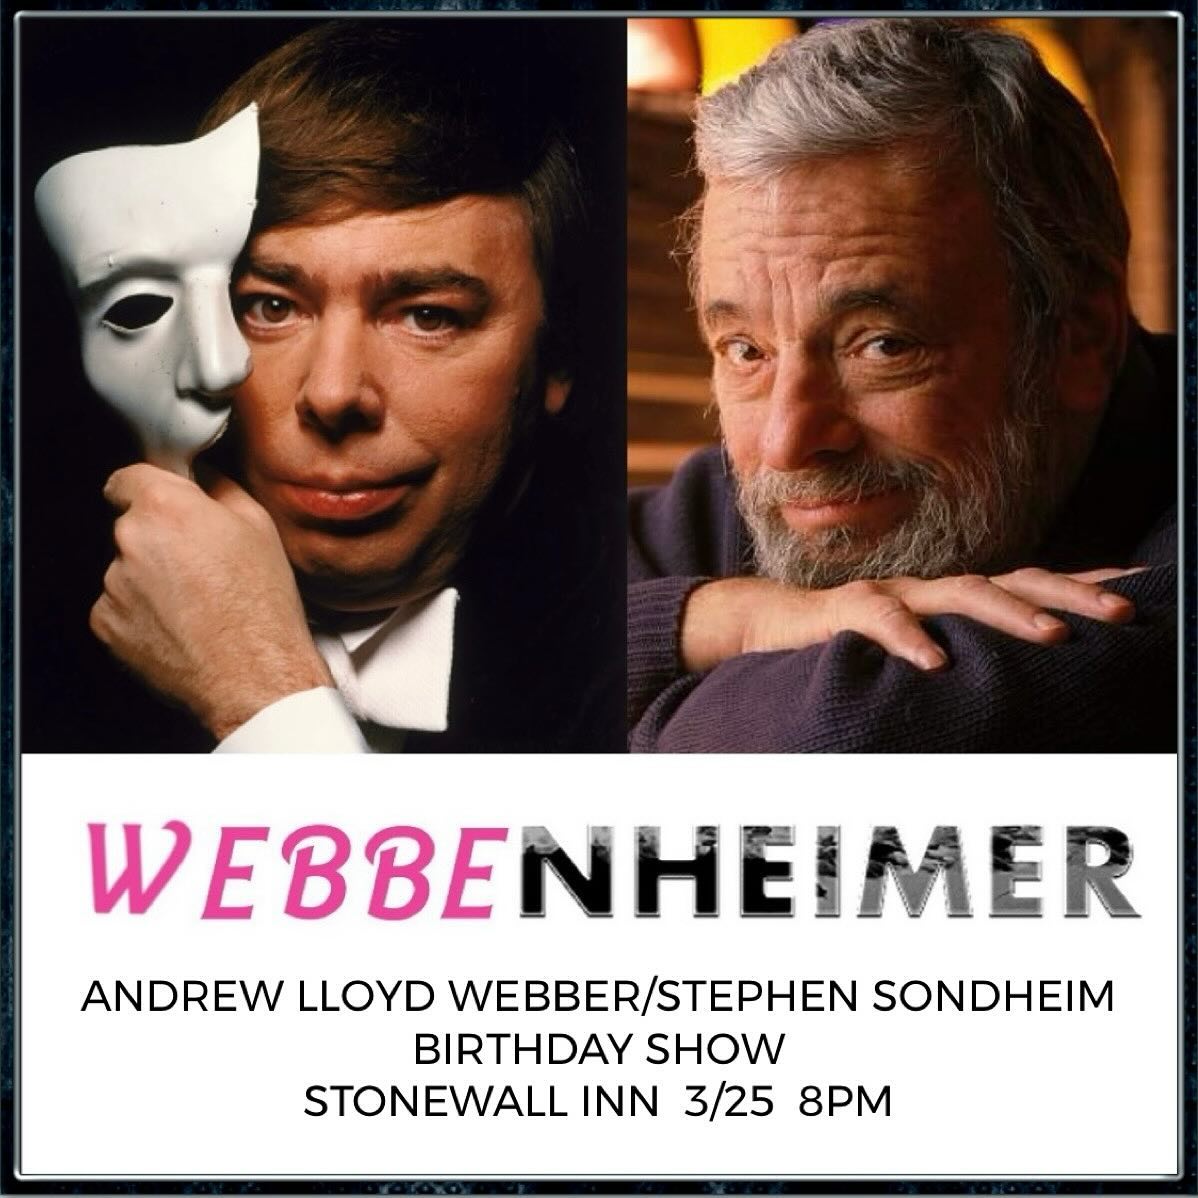 Promo for Webbenheimer at Stonewall Inn featuring pictures of Andrew Lloyd Webber and Stephen Sondheim